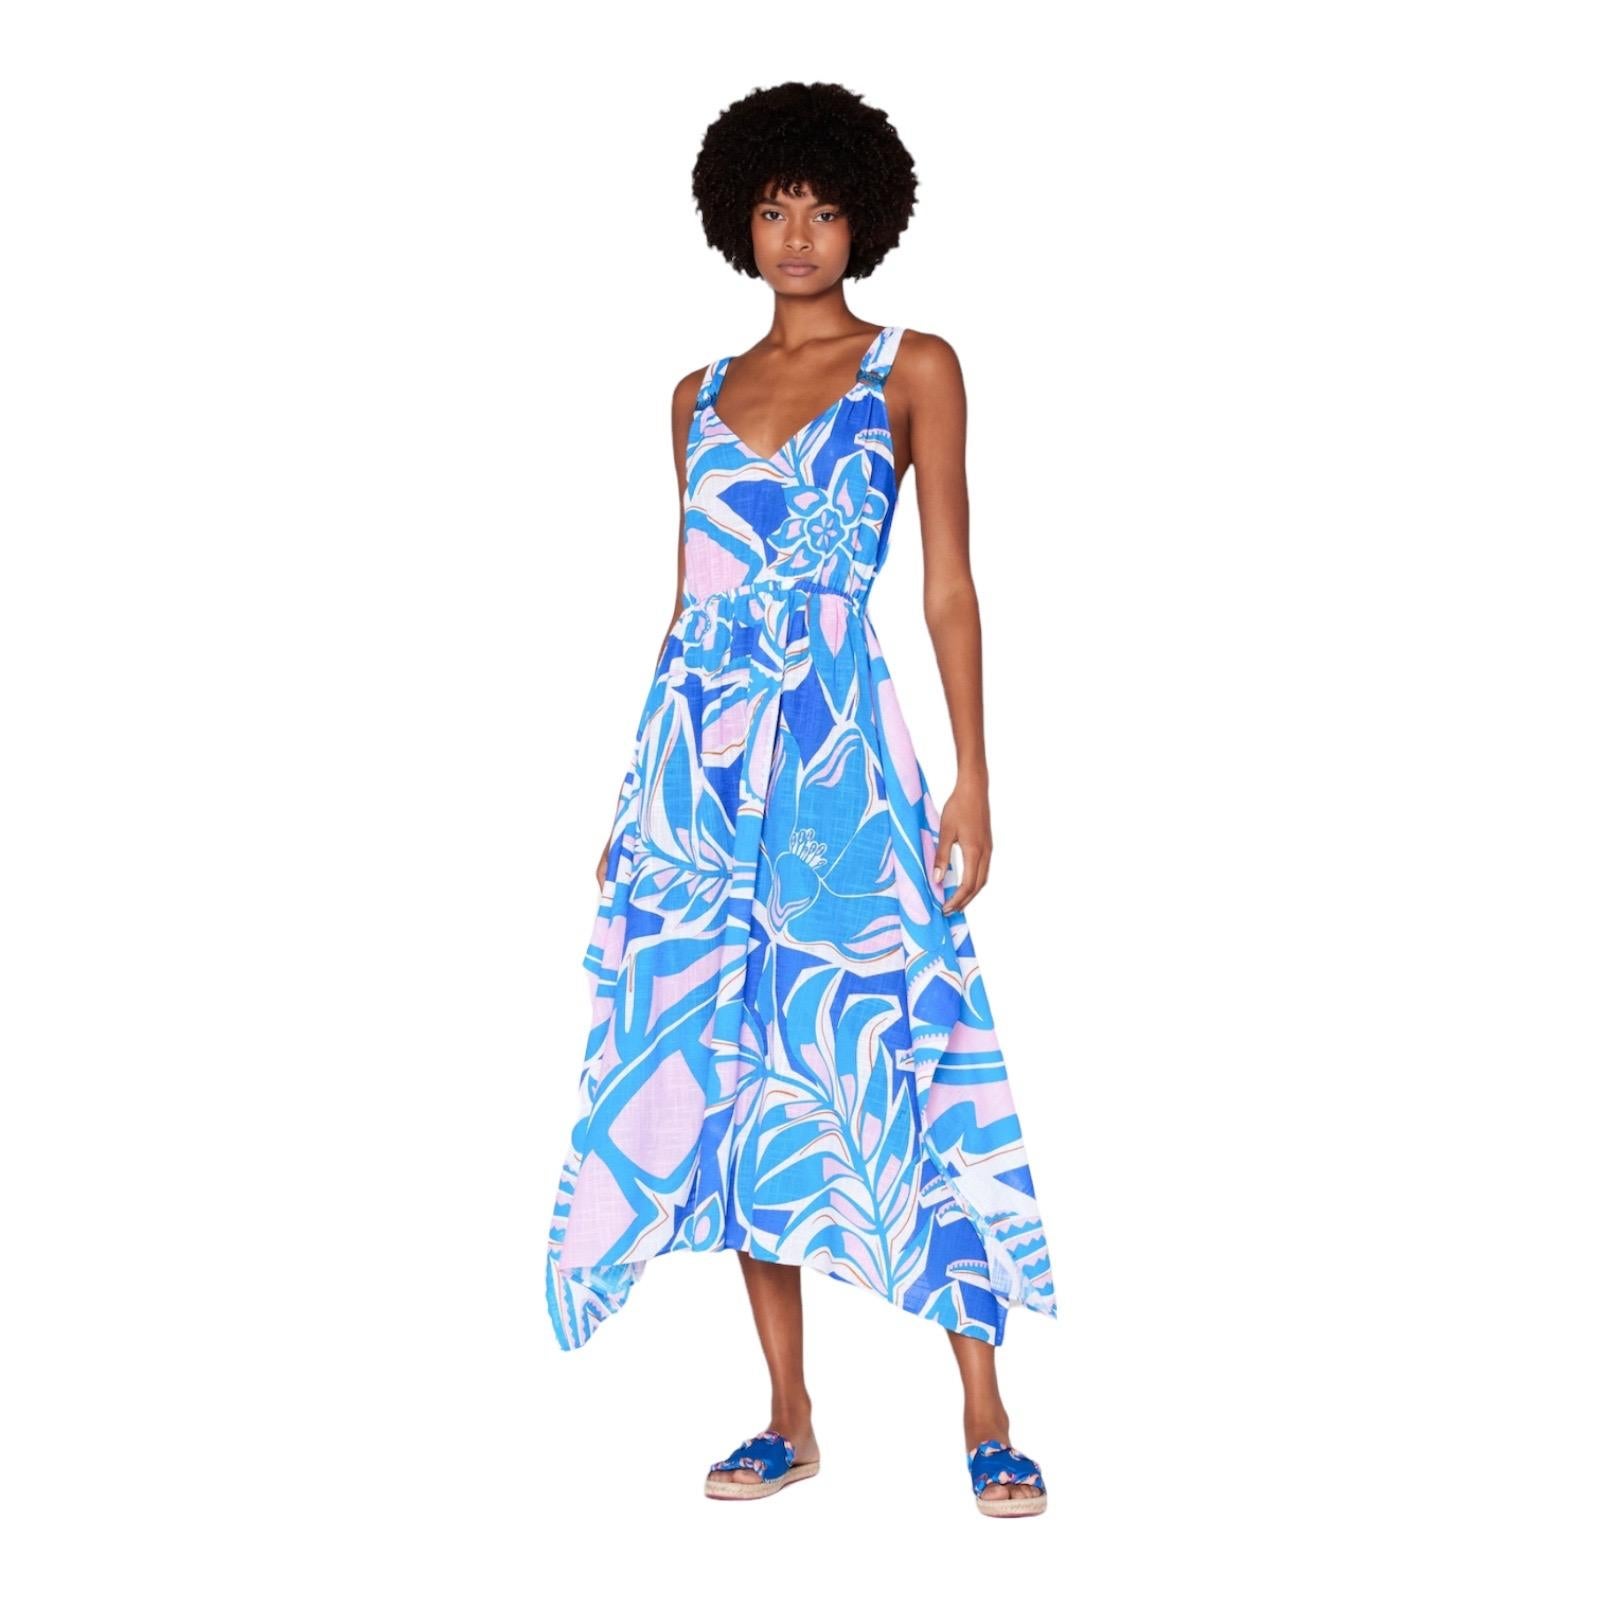 The vibrant botanical print, tropical hues and airy handle of this piece combine to create the ideal summer dress. It is cut from a soft cotton and feature printed with Samoa pattern, inspired by the lush landscape of its namesake Polynesian